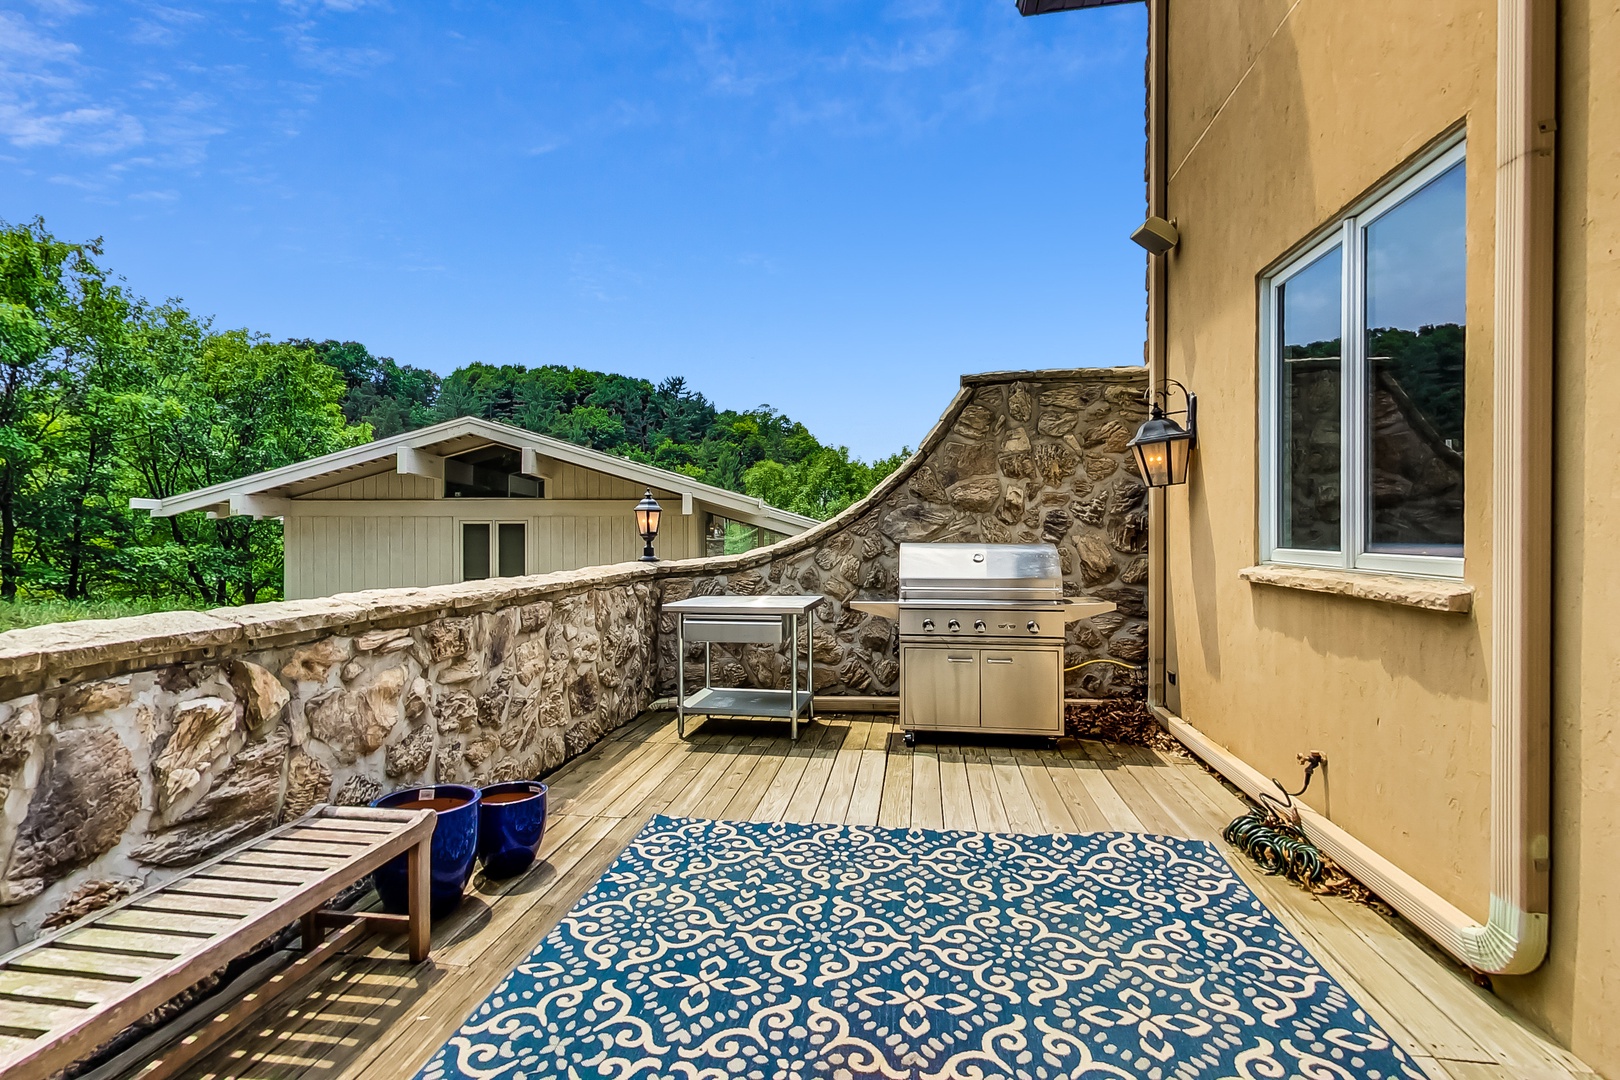 Comfortable seating and a top-of-the-line barbecue grill is on the back deck.